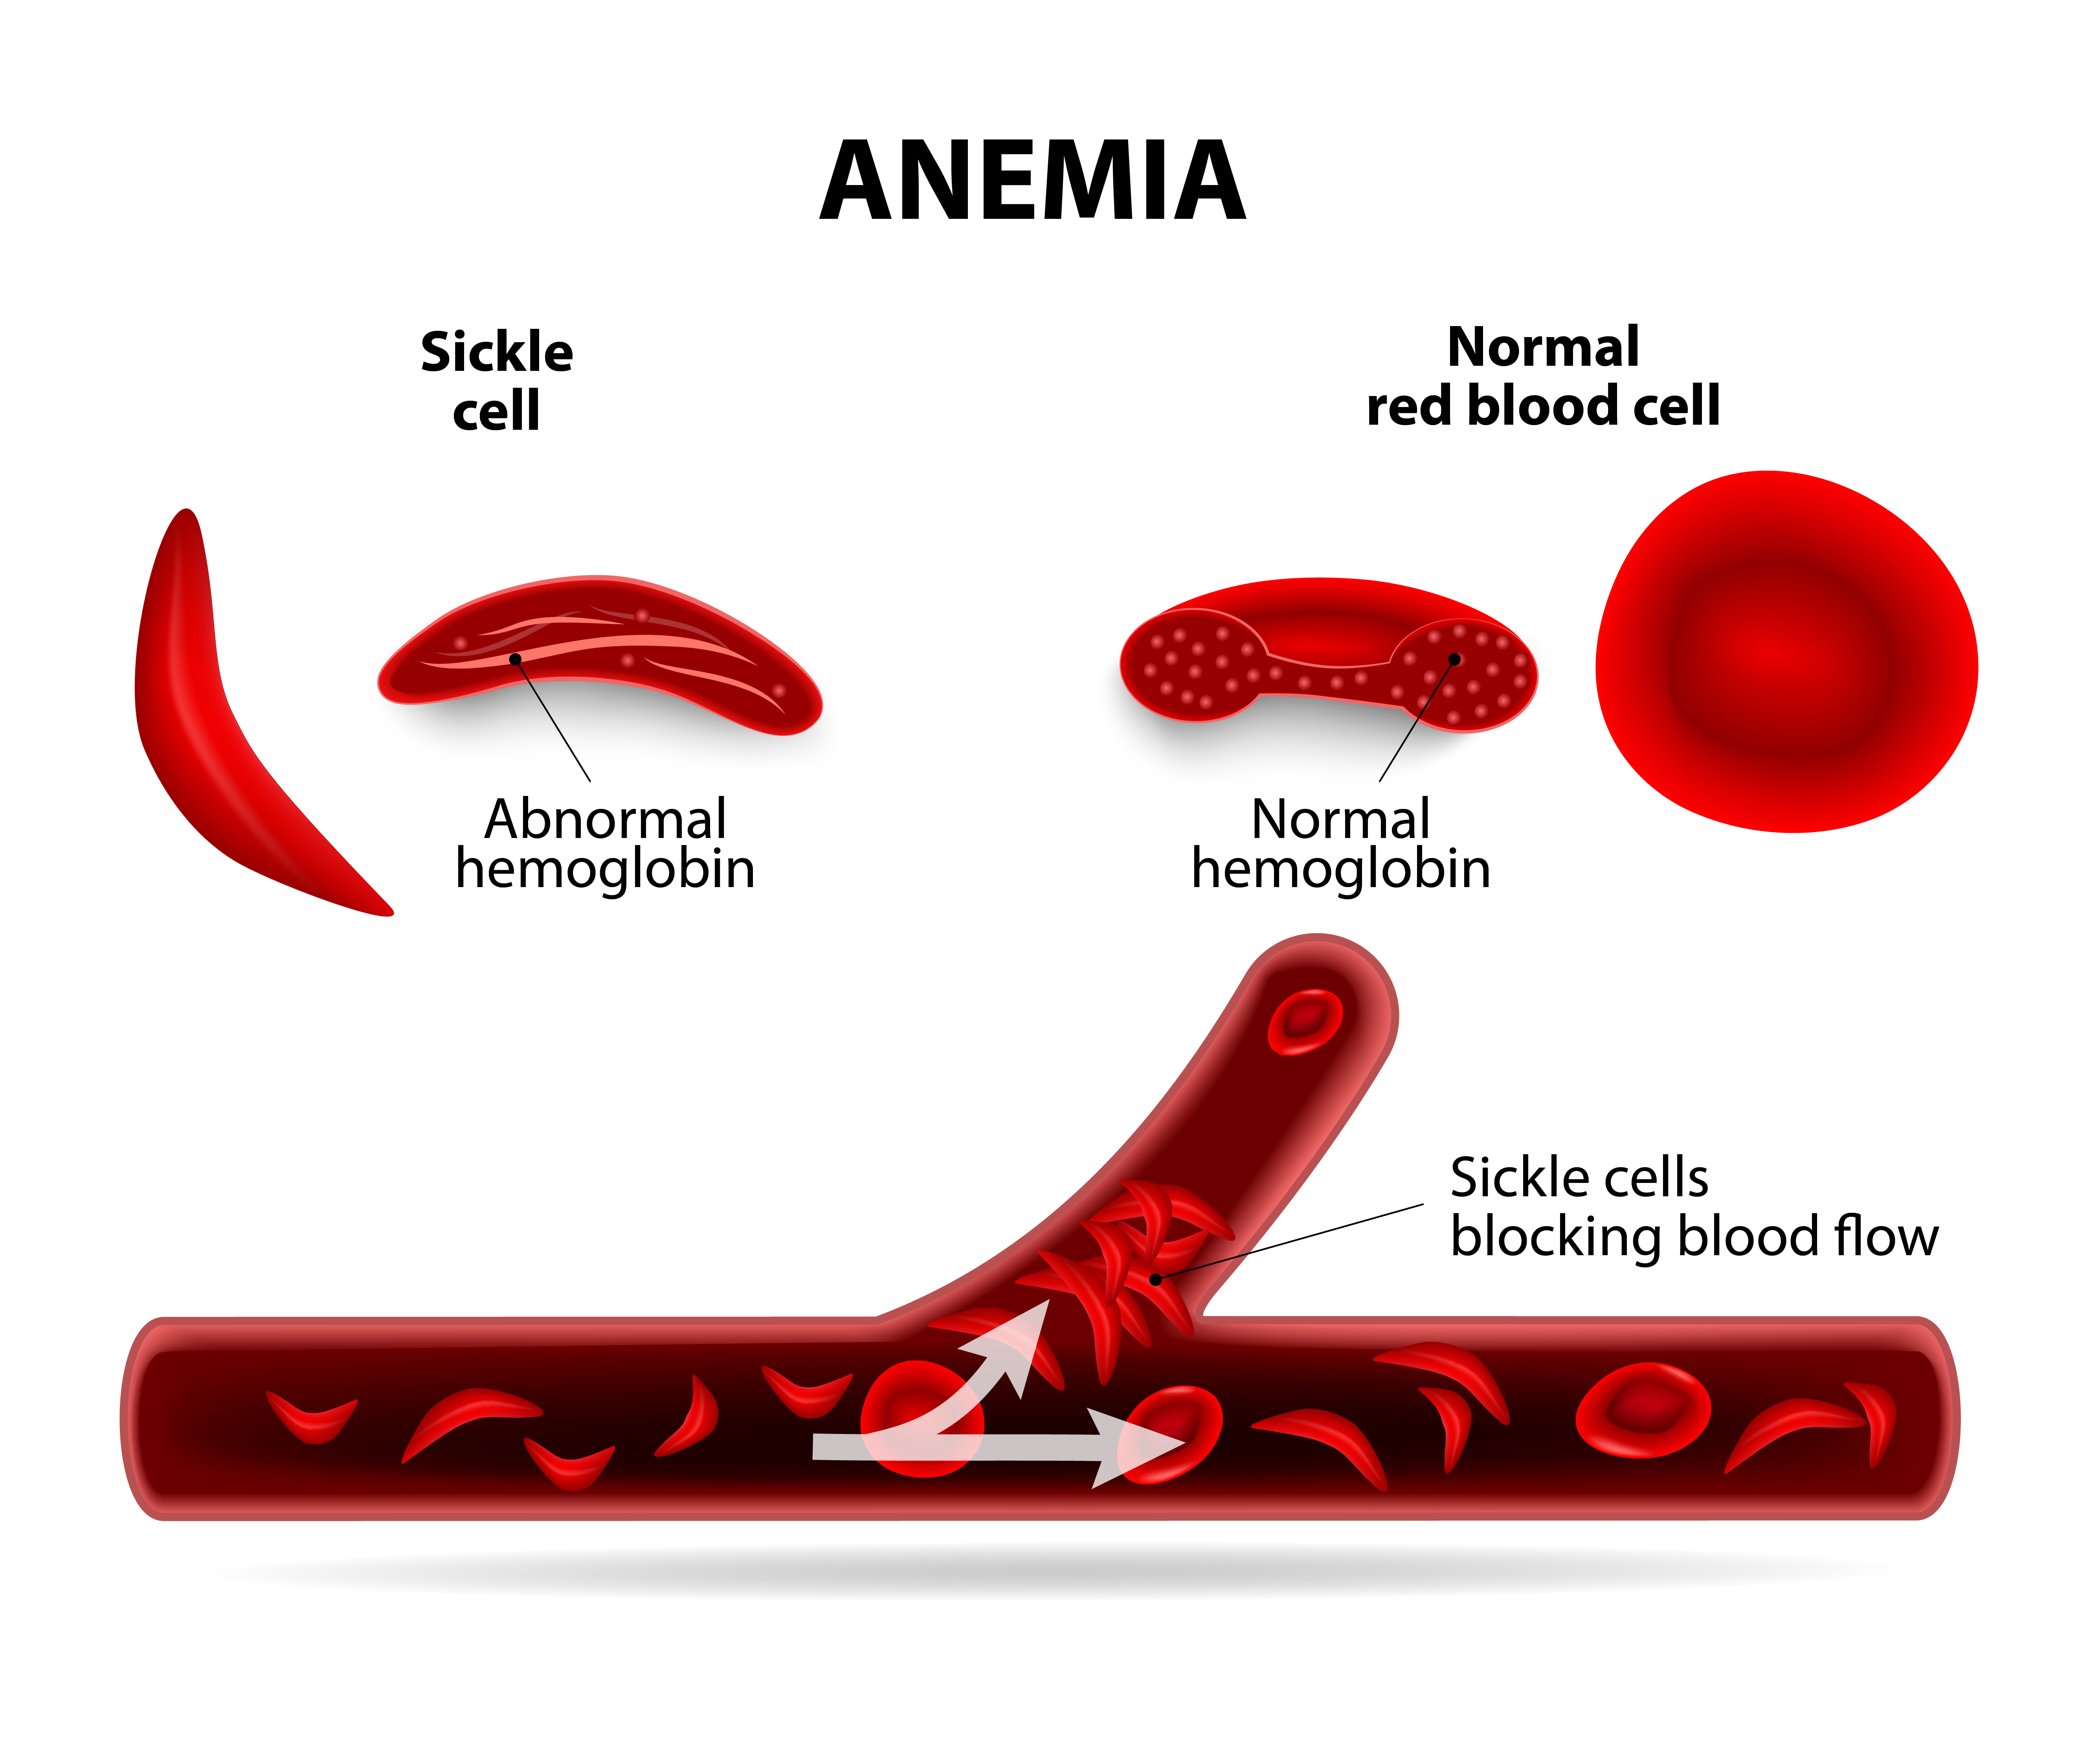 Sickle cell anemia photo